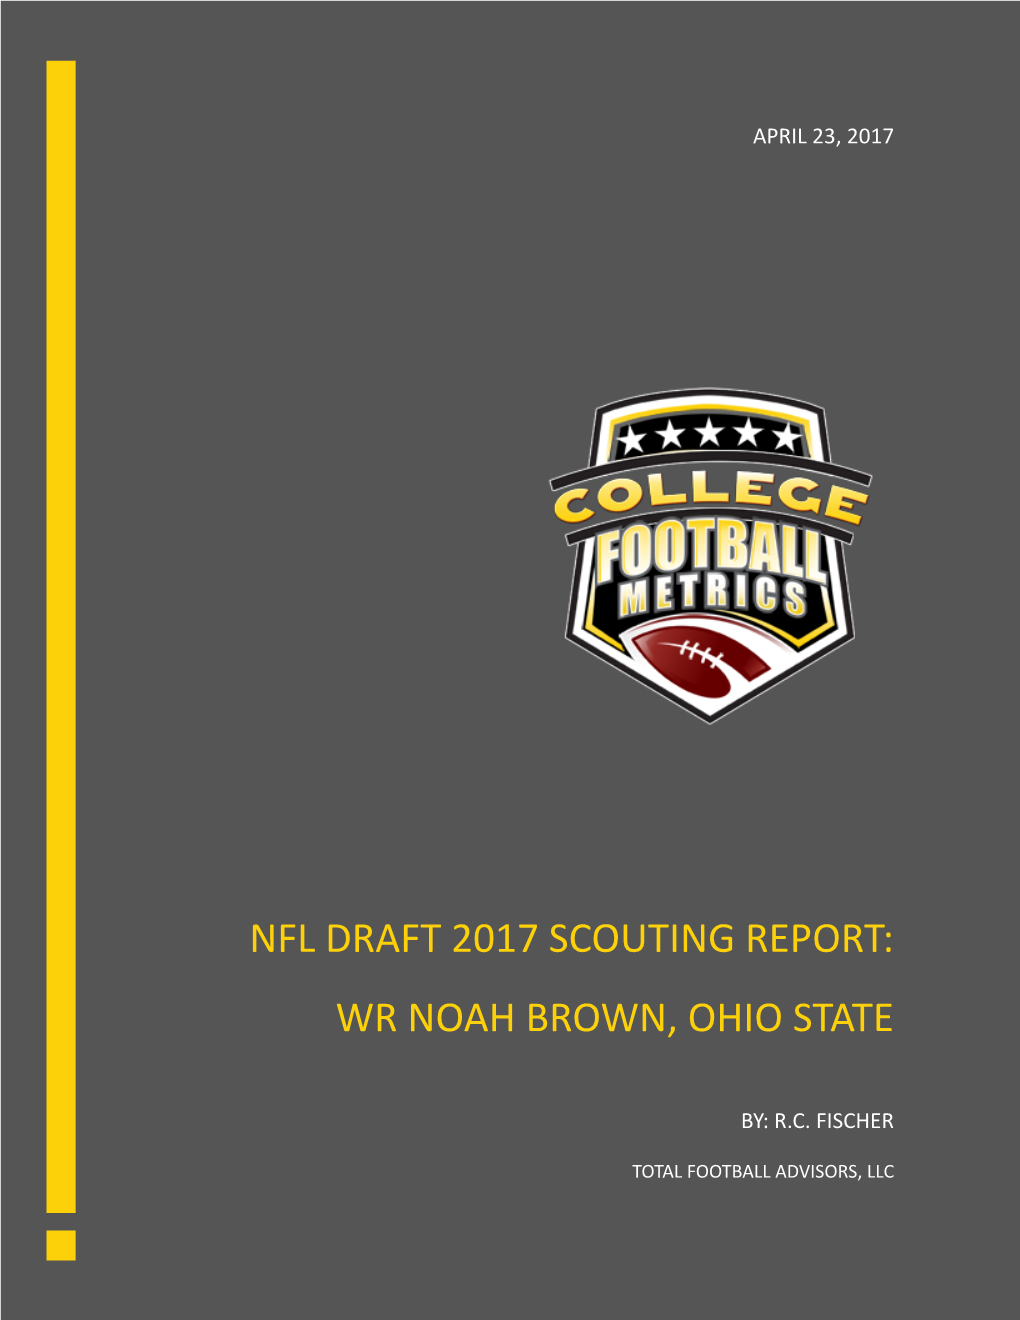 Nfl Draft 2017 Scouting Report: Wr Noah Brown, Ohio State